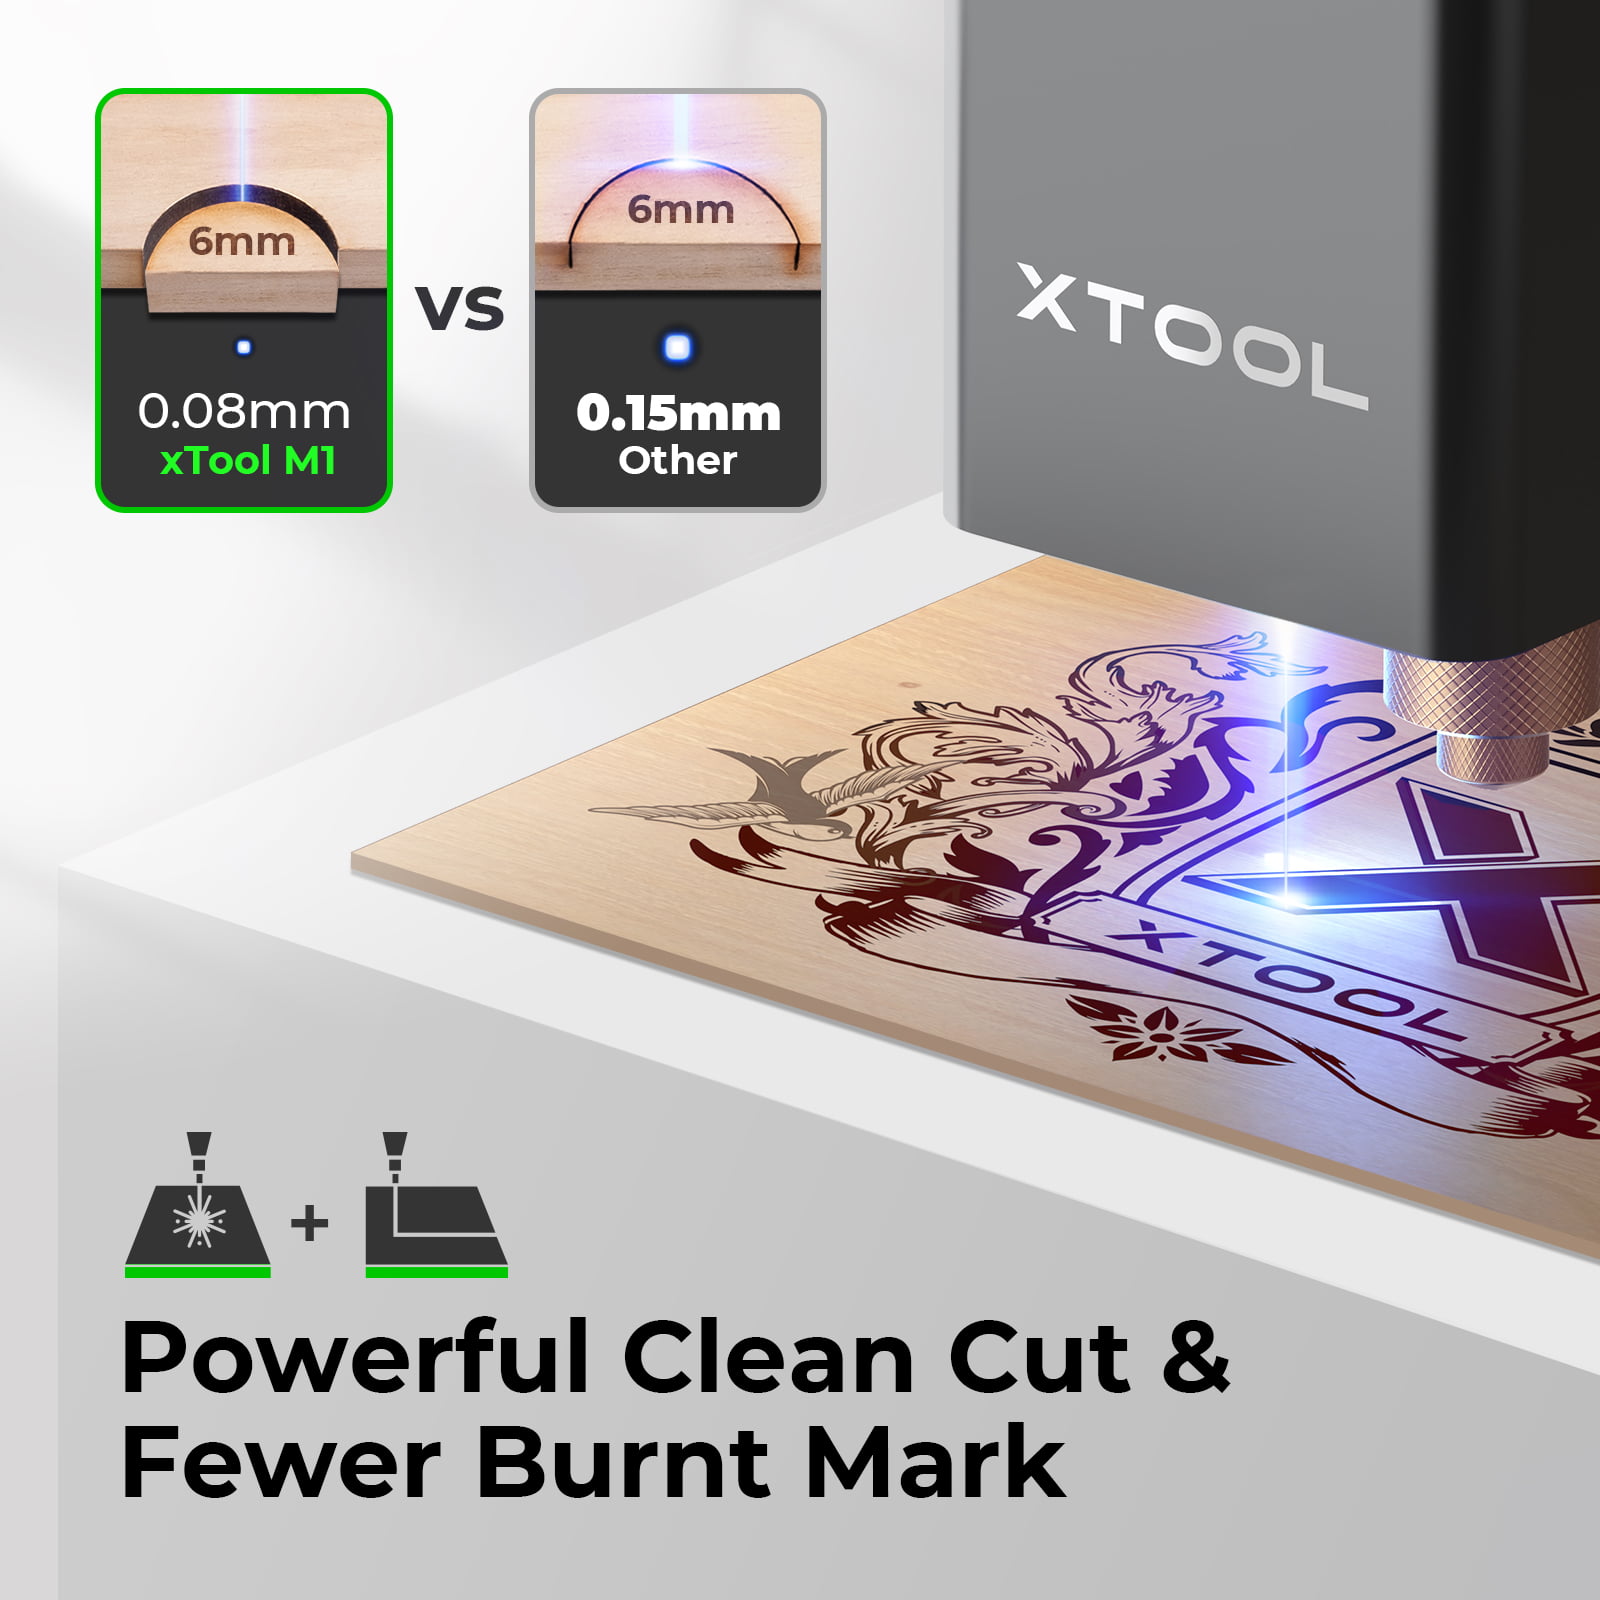 xTool M1 5w Laser Engraver, Compact 3-in-1 Laser & Blade Cutting Engraving  Machine for all Crafts, Higher Accuracy & Smarter 16MP Auto-Focus 